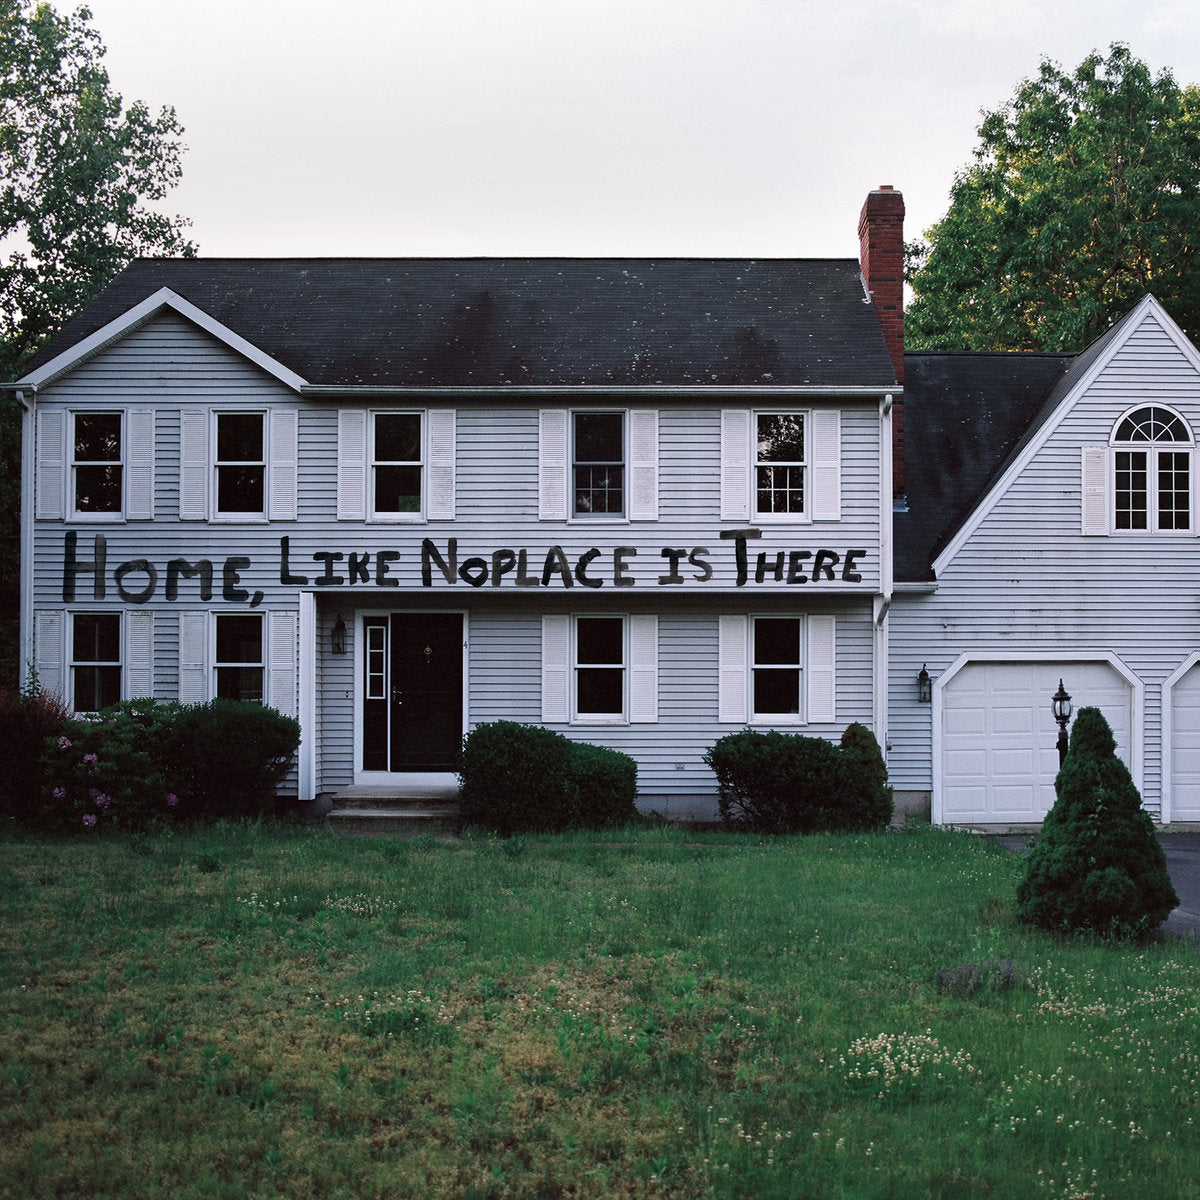 The Hotelier - Home, Like Noplace Is There (CIRecs Exclusive)